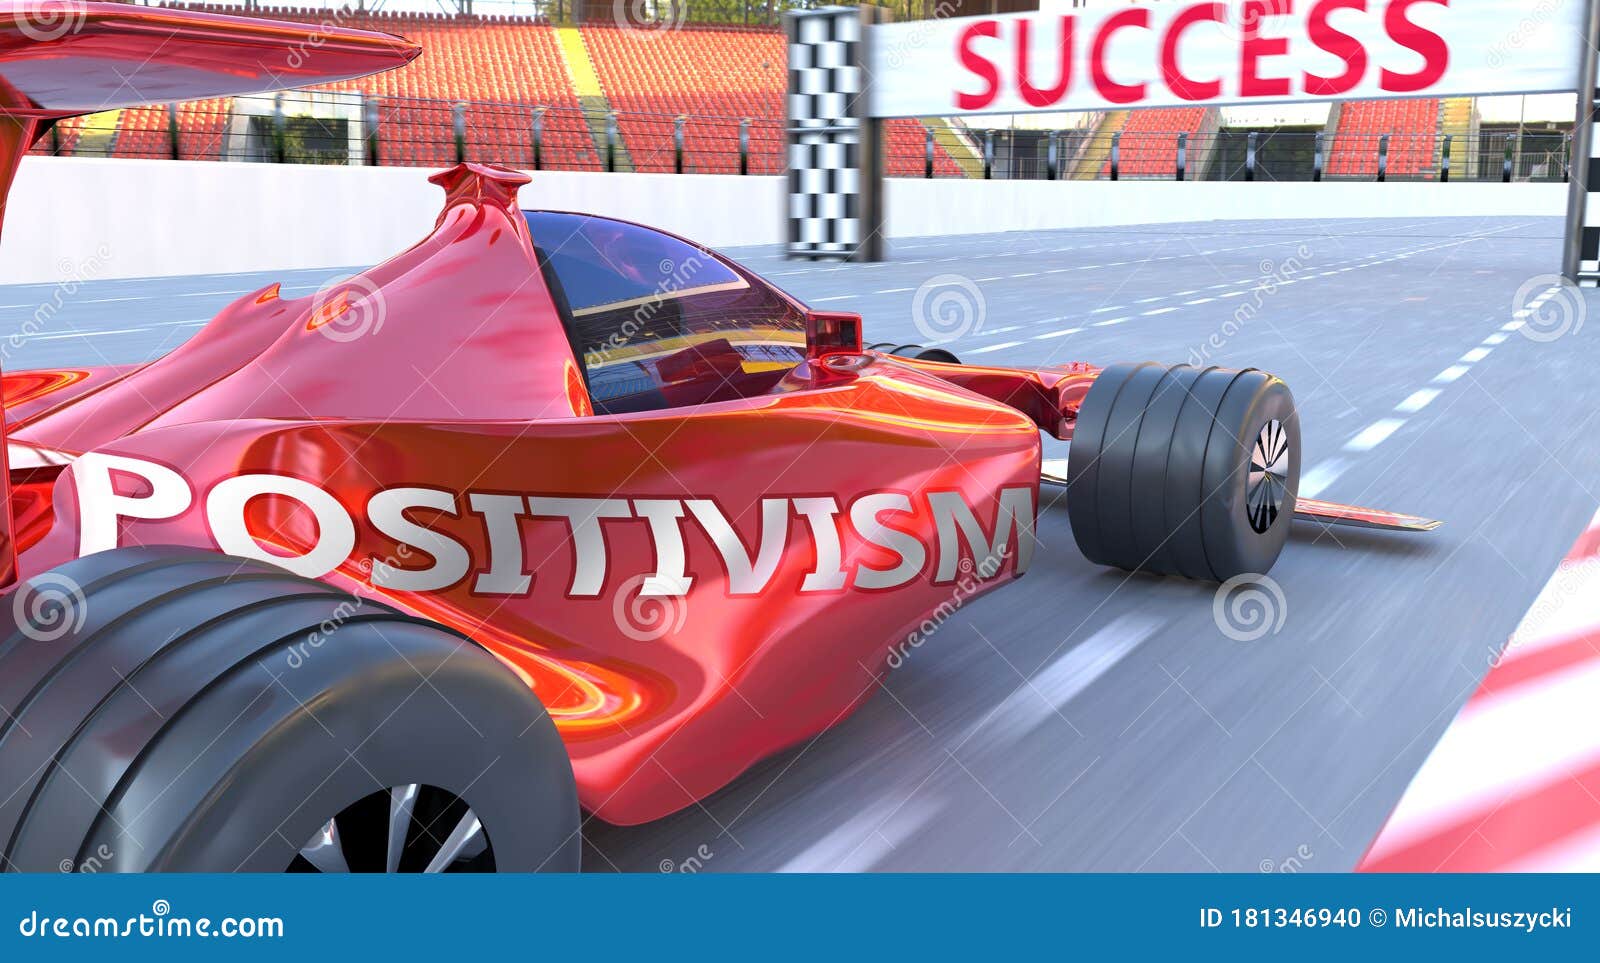 positivism and success - pictured as word positivism and a f1 car, to ize that positivism can help achieving success and